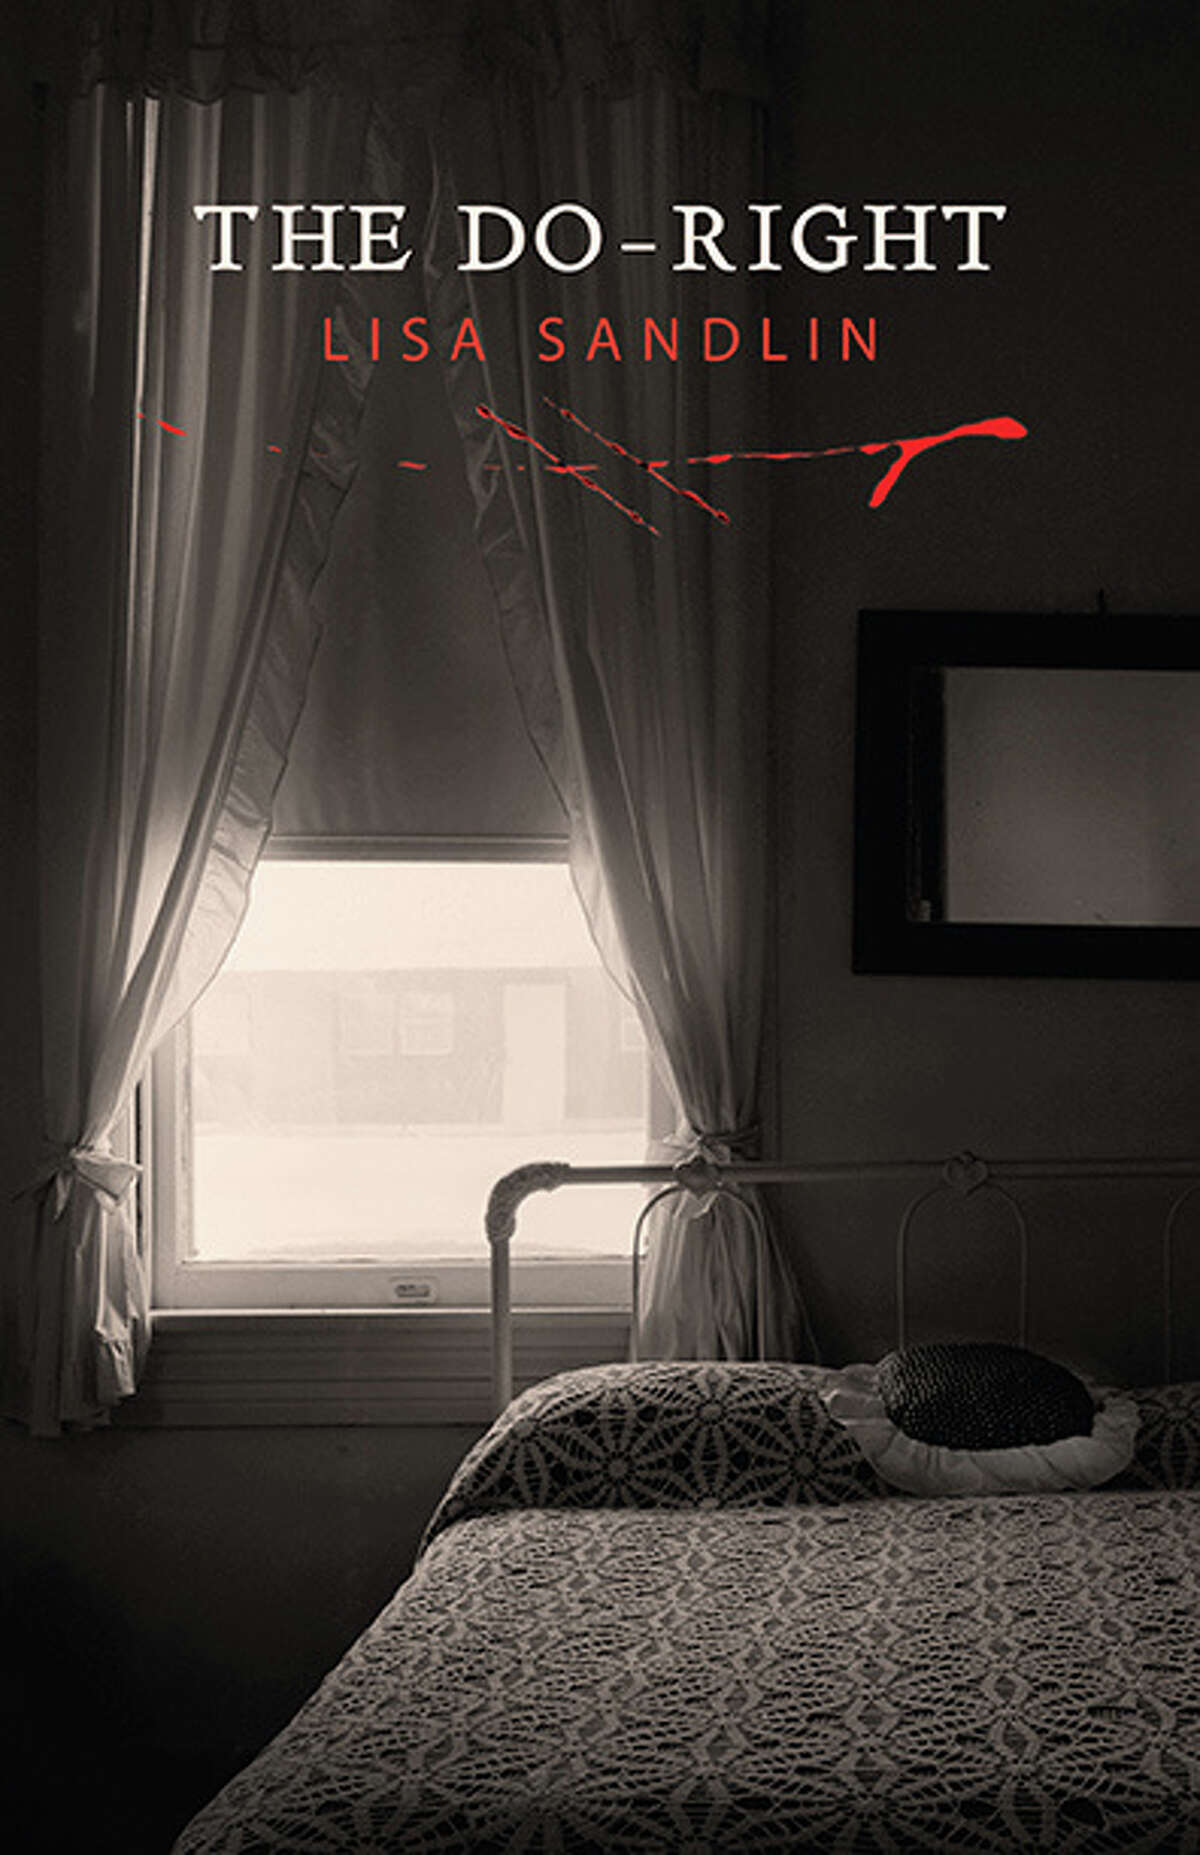 "The Do-Right," by author Lisa Sandlin. The cover shot is by Beaumont photographer Keith Carter.